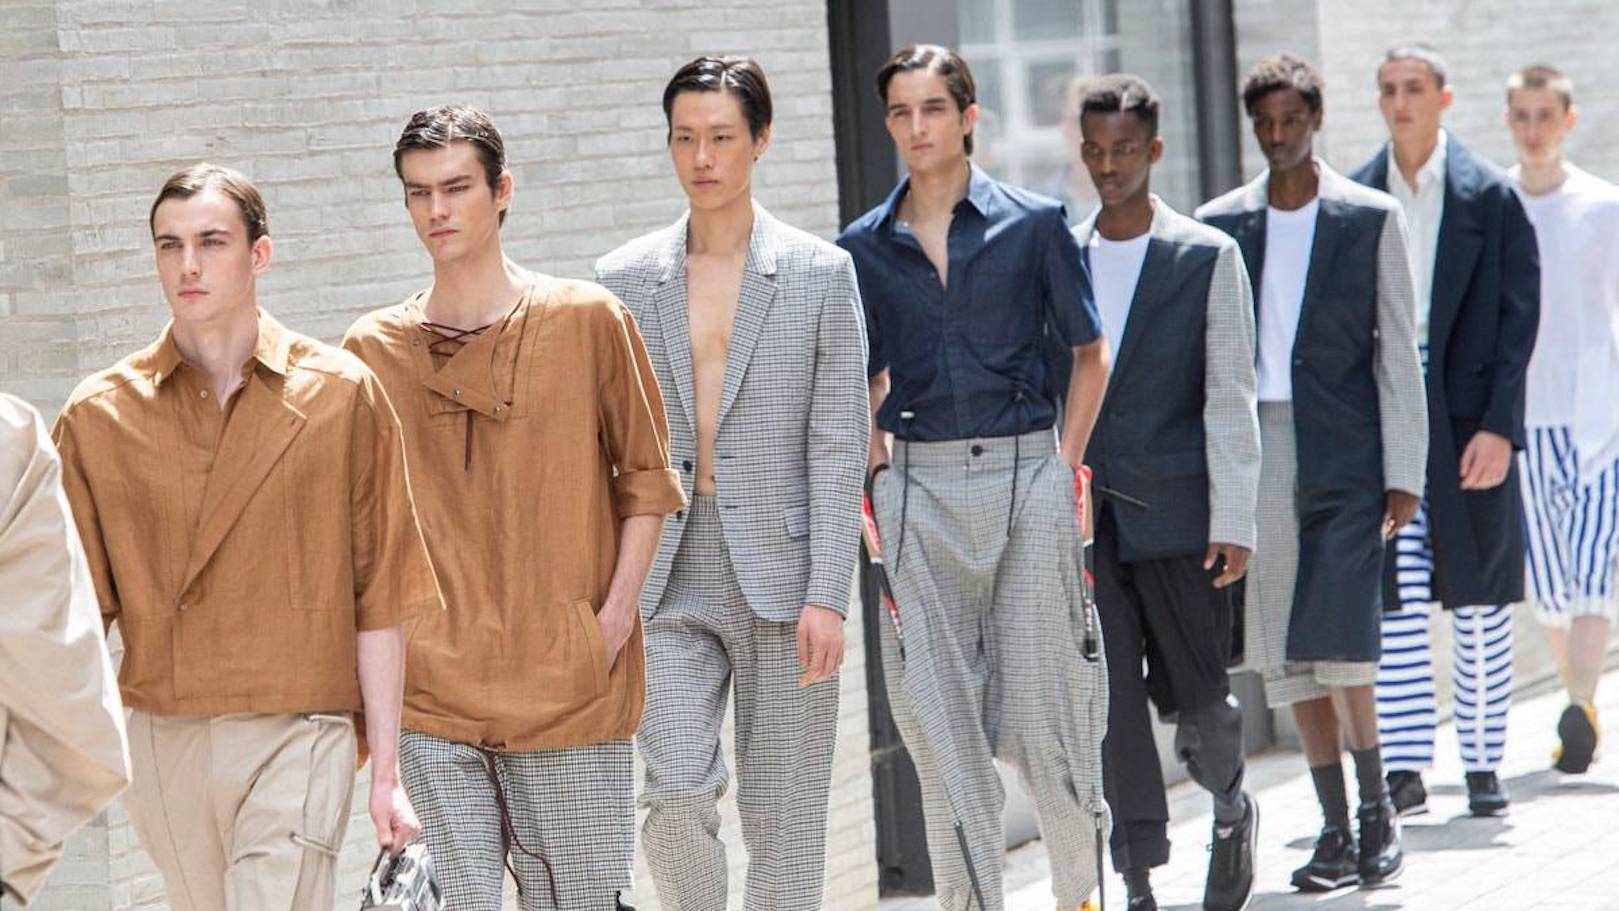 The dichotomy between interest and access within Men’s Fashion